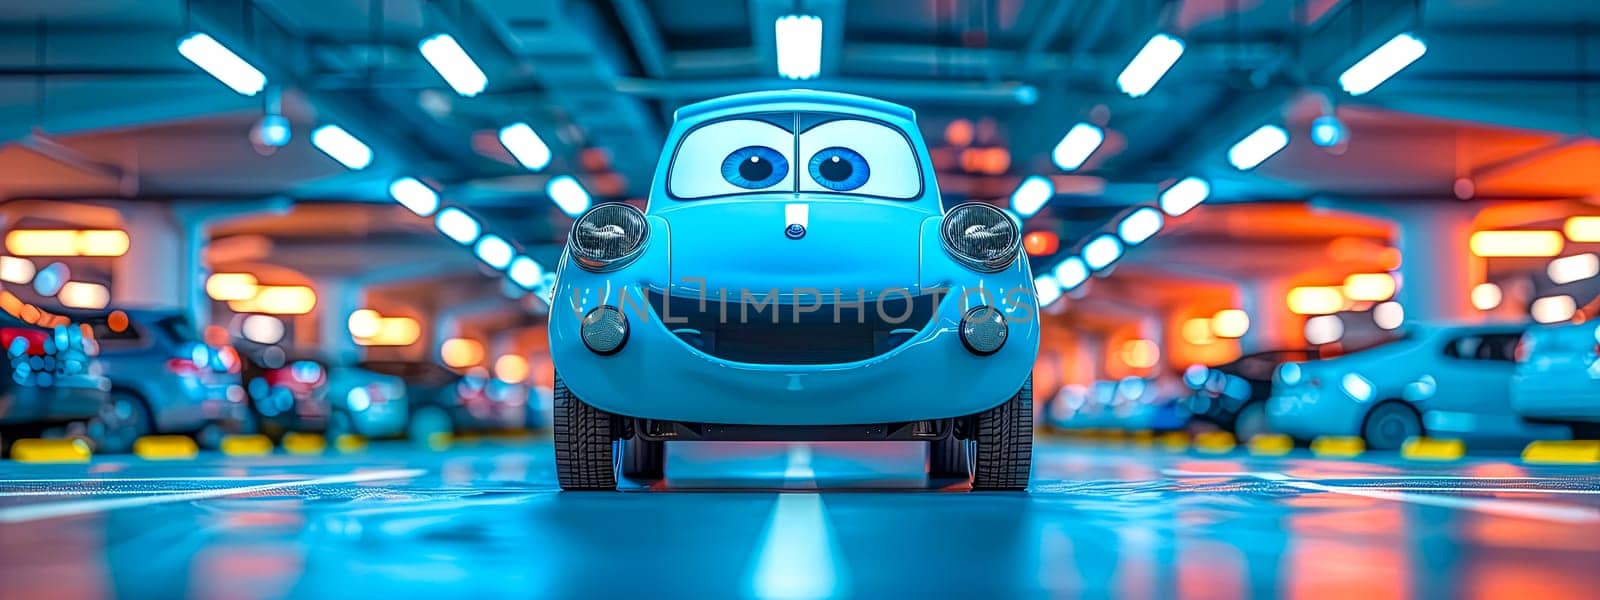 Animated Blue Car Character in Colorful Car Dealership.